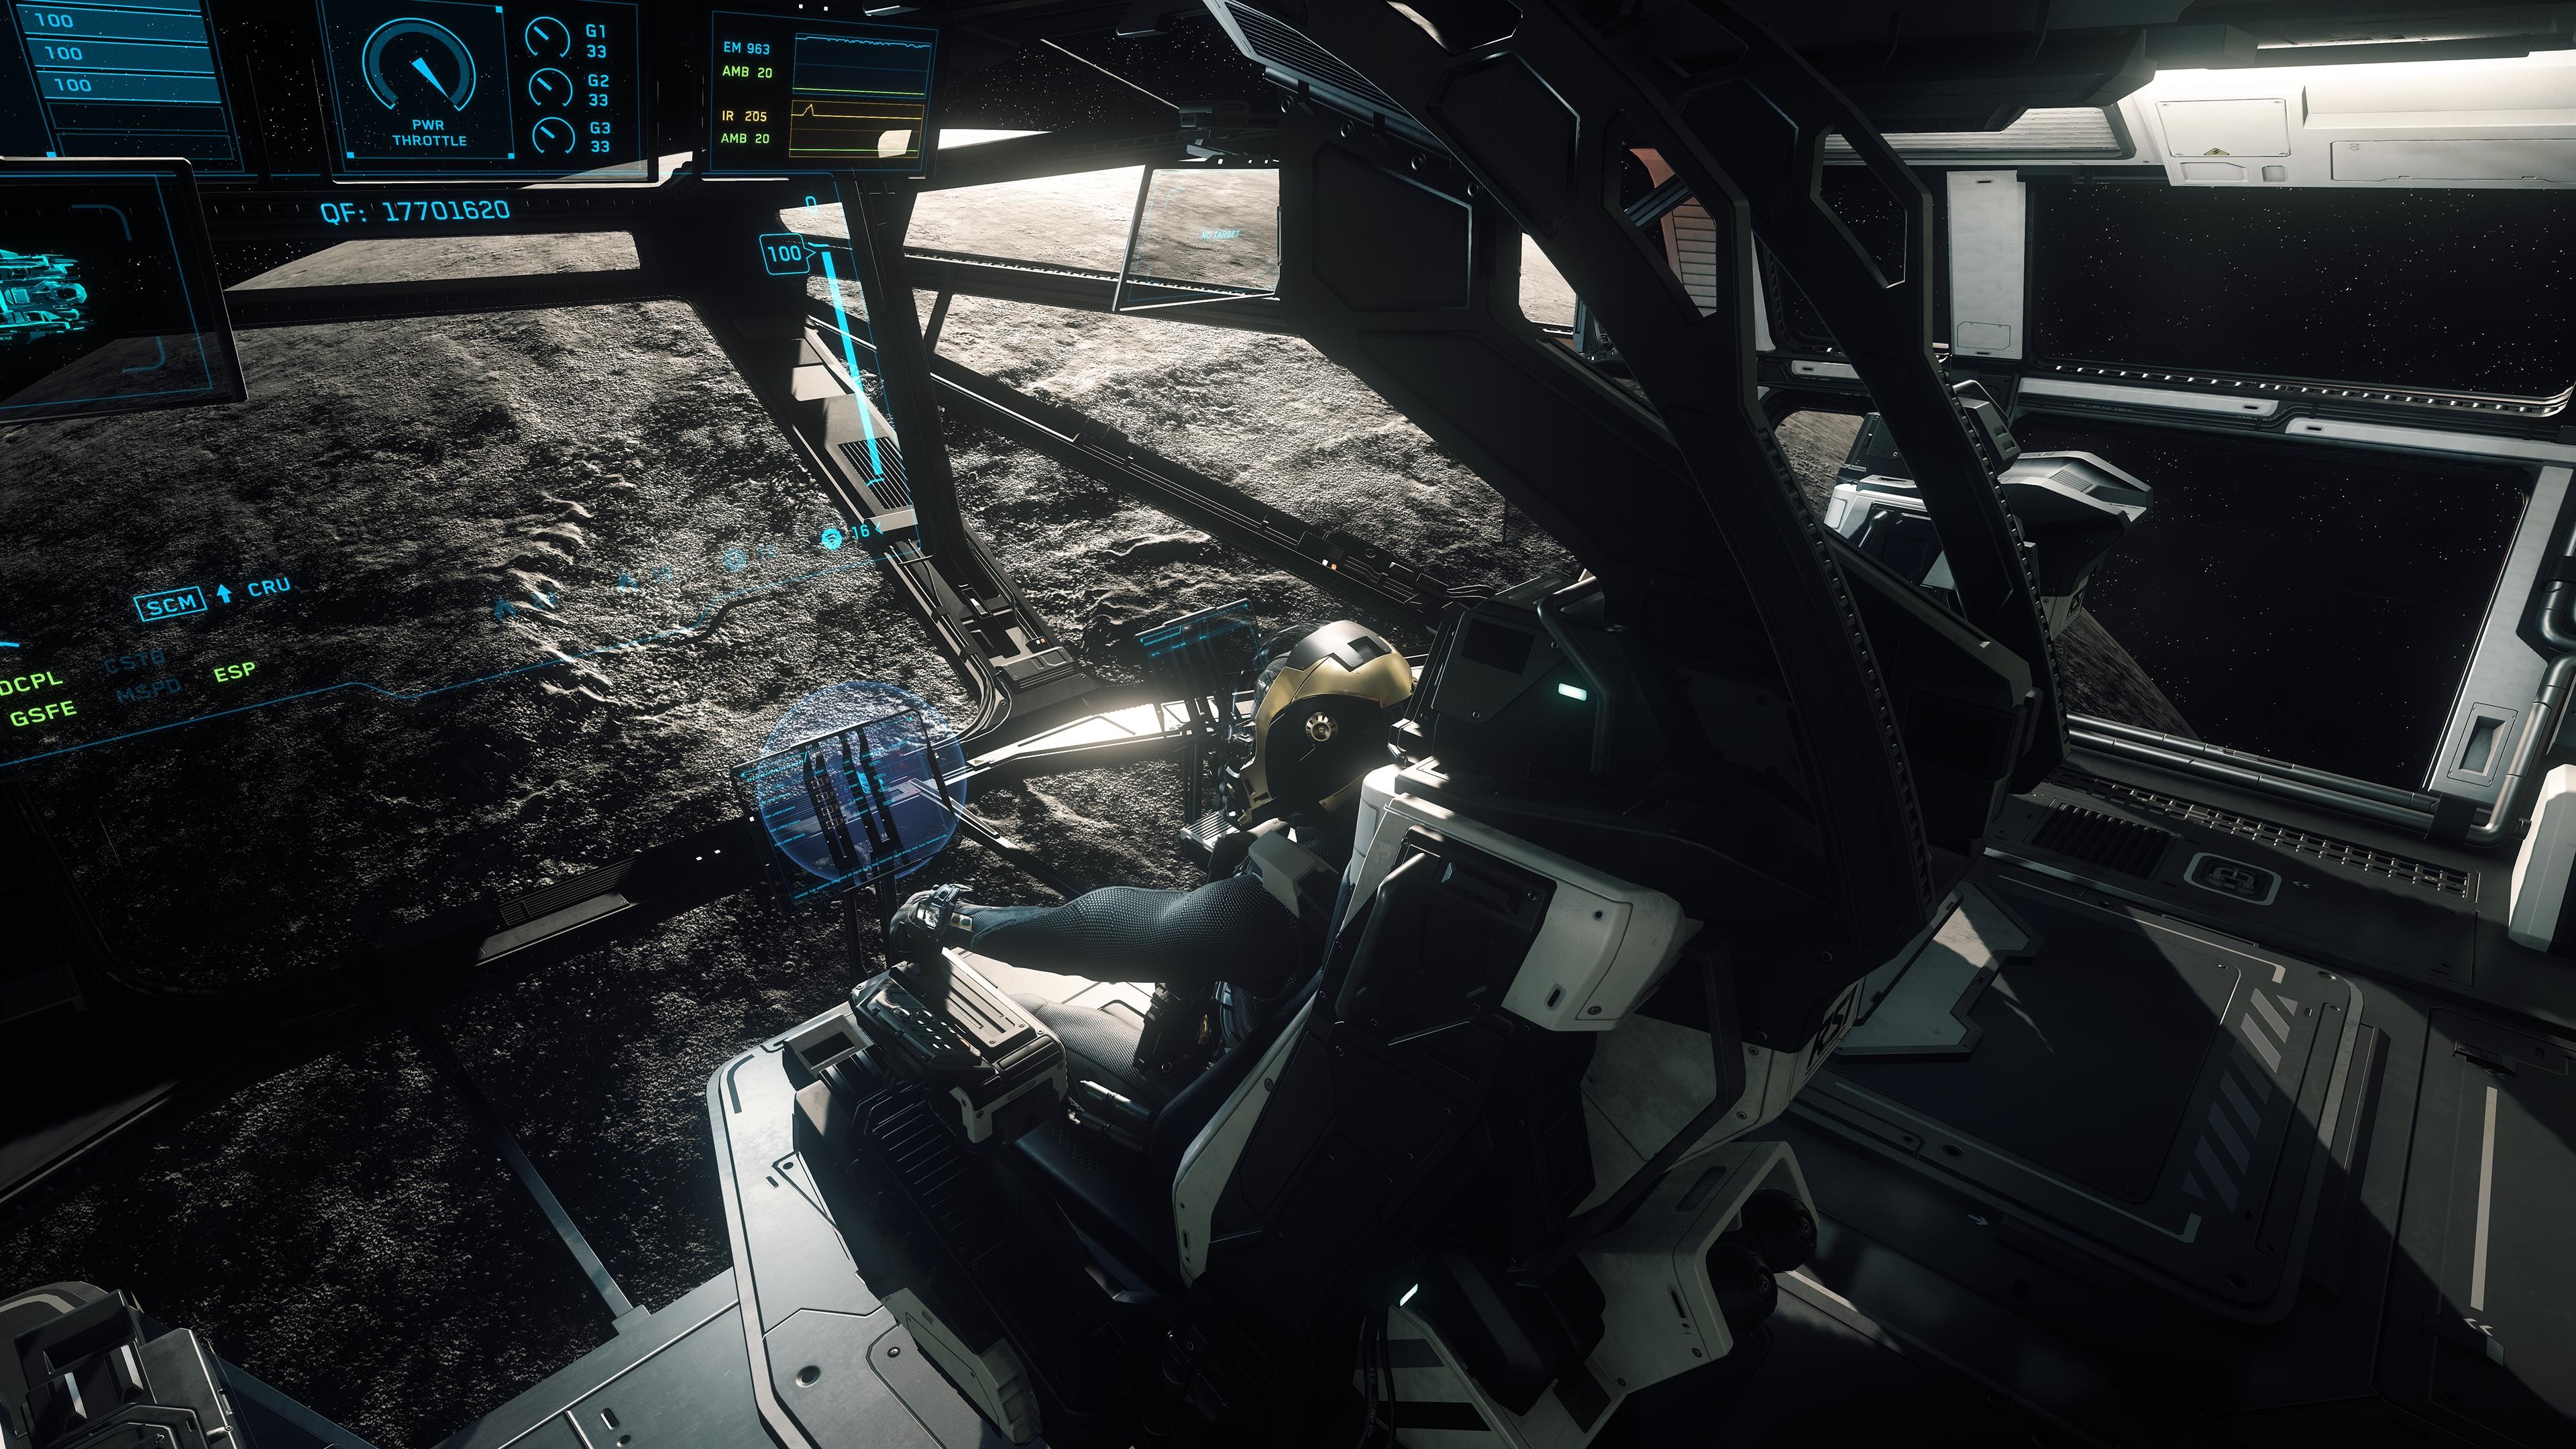 General 3840x2160 Star Citizen Constellation Andromeda spaceship video games PC gaming cockpit